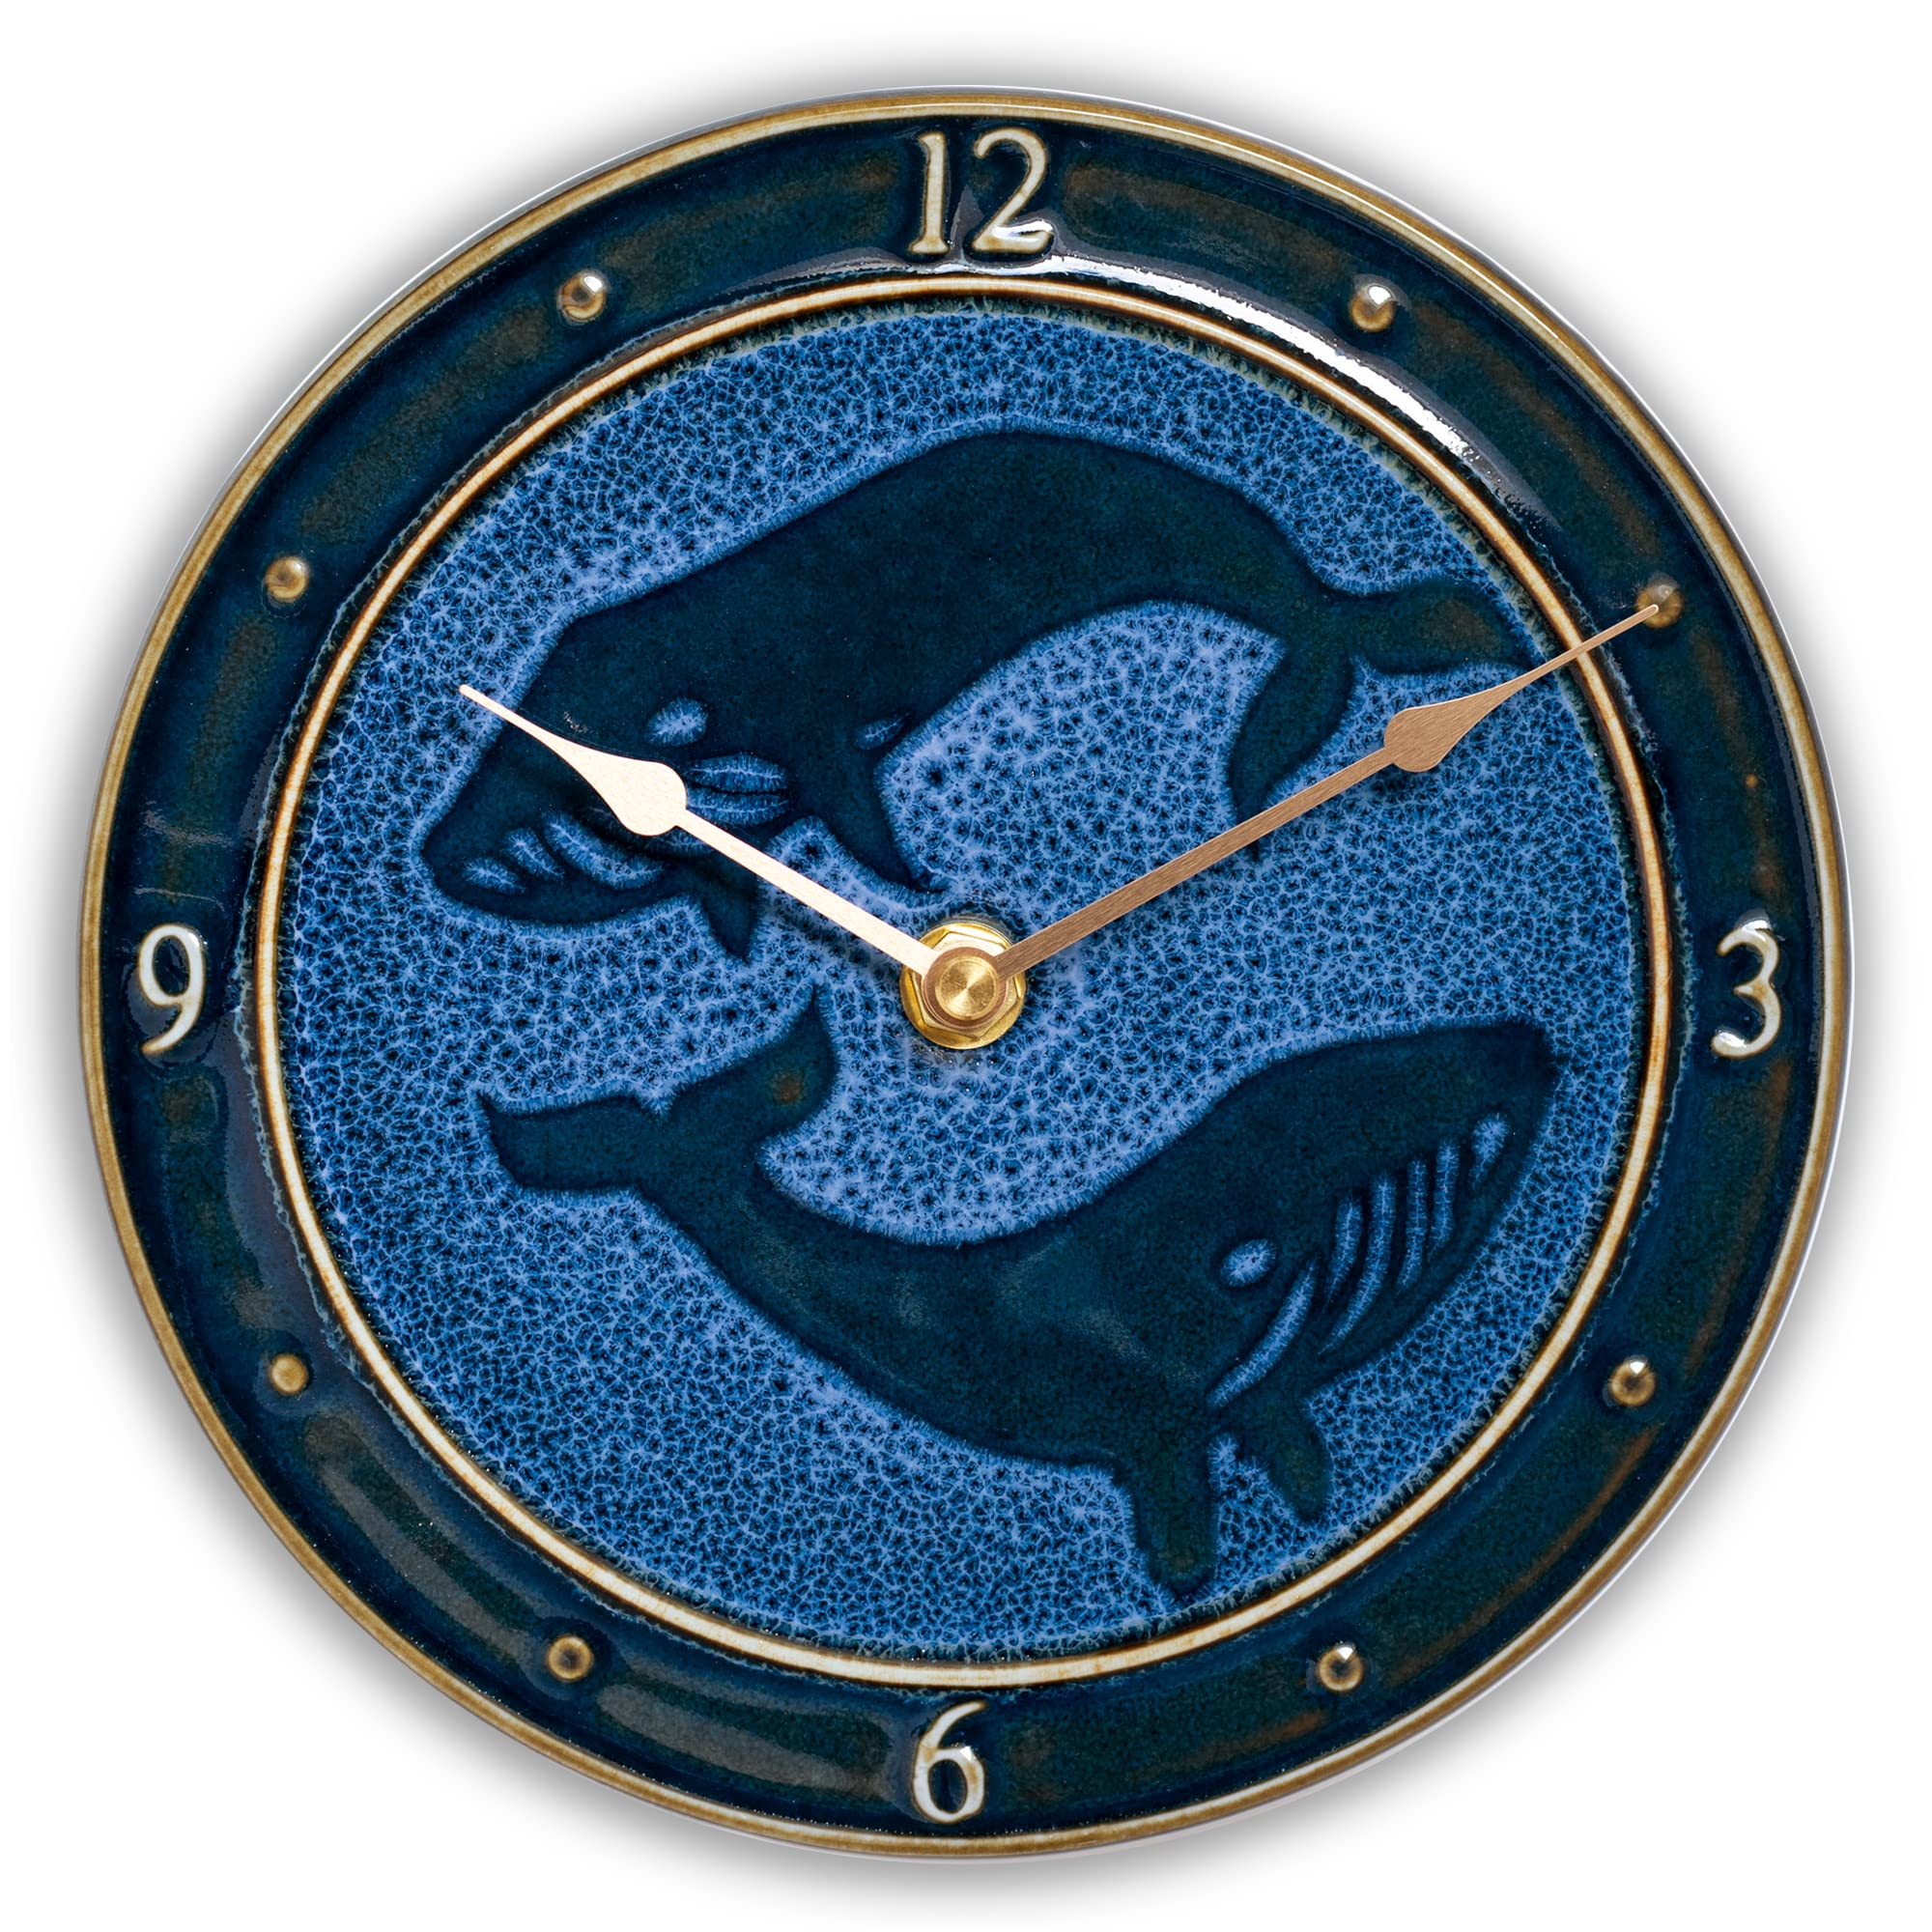 Georgetown Pottery Ceramic Large Wall Clock (8 inch) Handmade, Made in USA (Blue Whale)